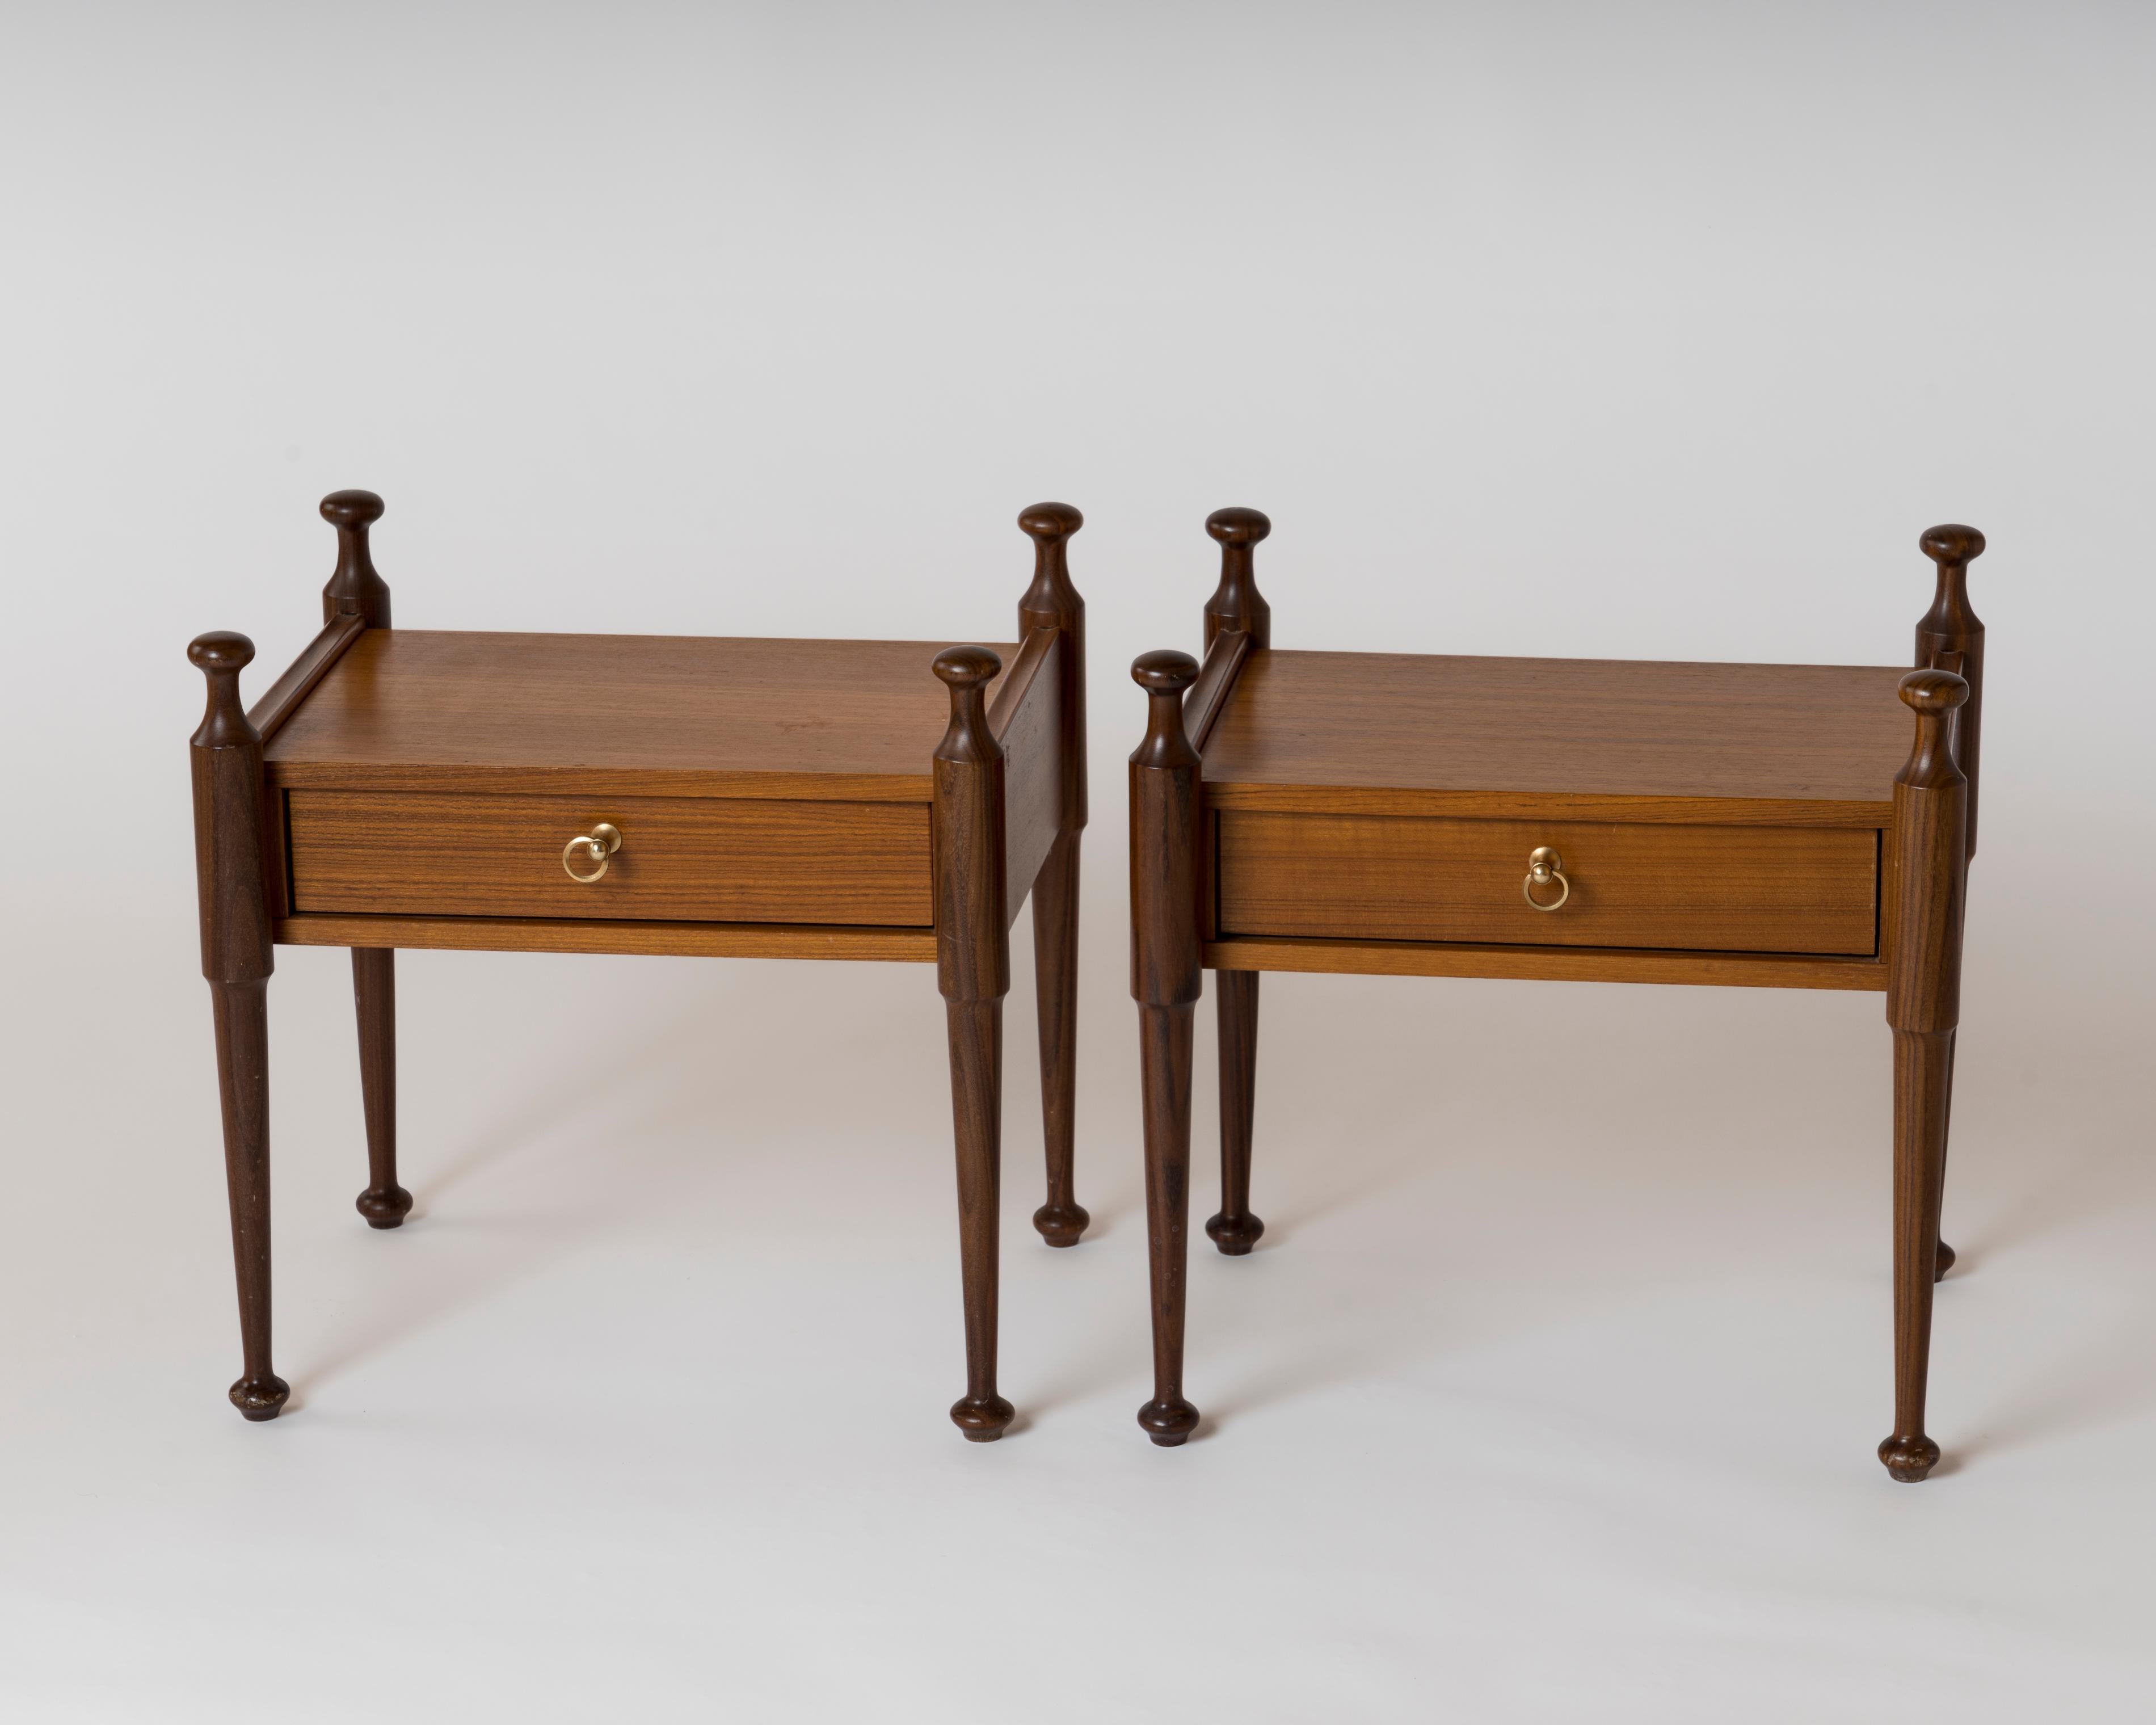 Elegantly designed pair of teak veneer Scandinavian style nightstands attributed to Gautier France 1970s. These nightstands were constructed with teak and feature beautiful finial details on both sides of the tapered legs. Single drawer with a